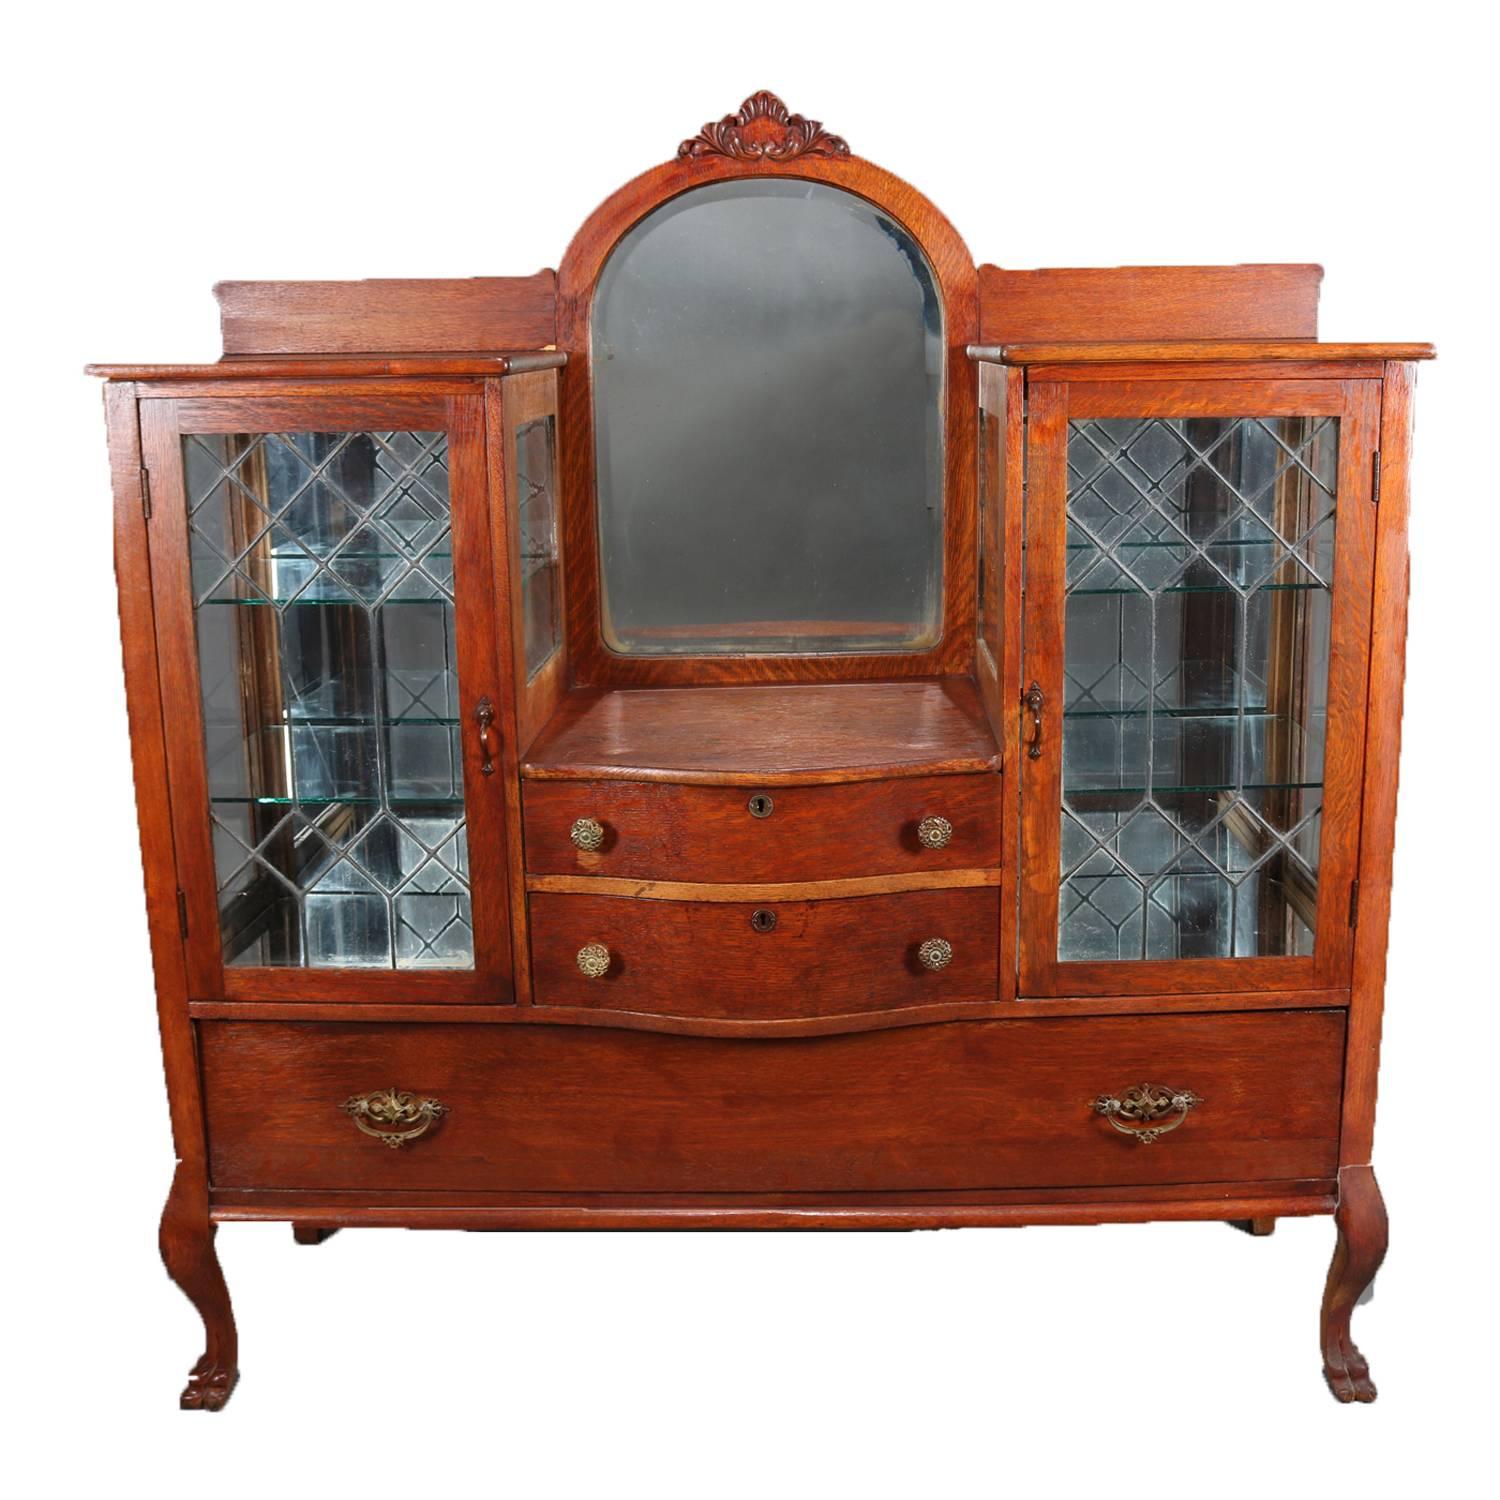 Antique China buffet features oak construction with central arched beveled mirror with carved foliate crest above two central drawers and having flanking enclosed glass china displays having glass sides and leaded glass doors opening to